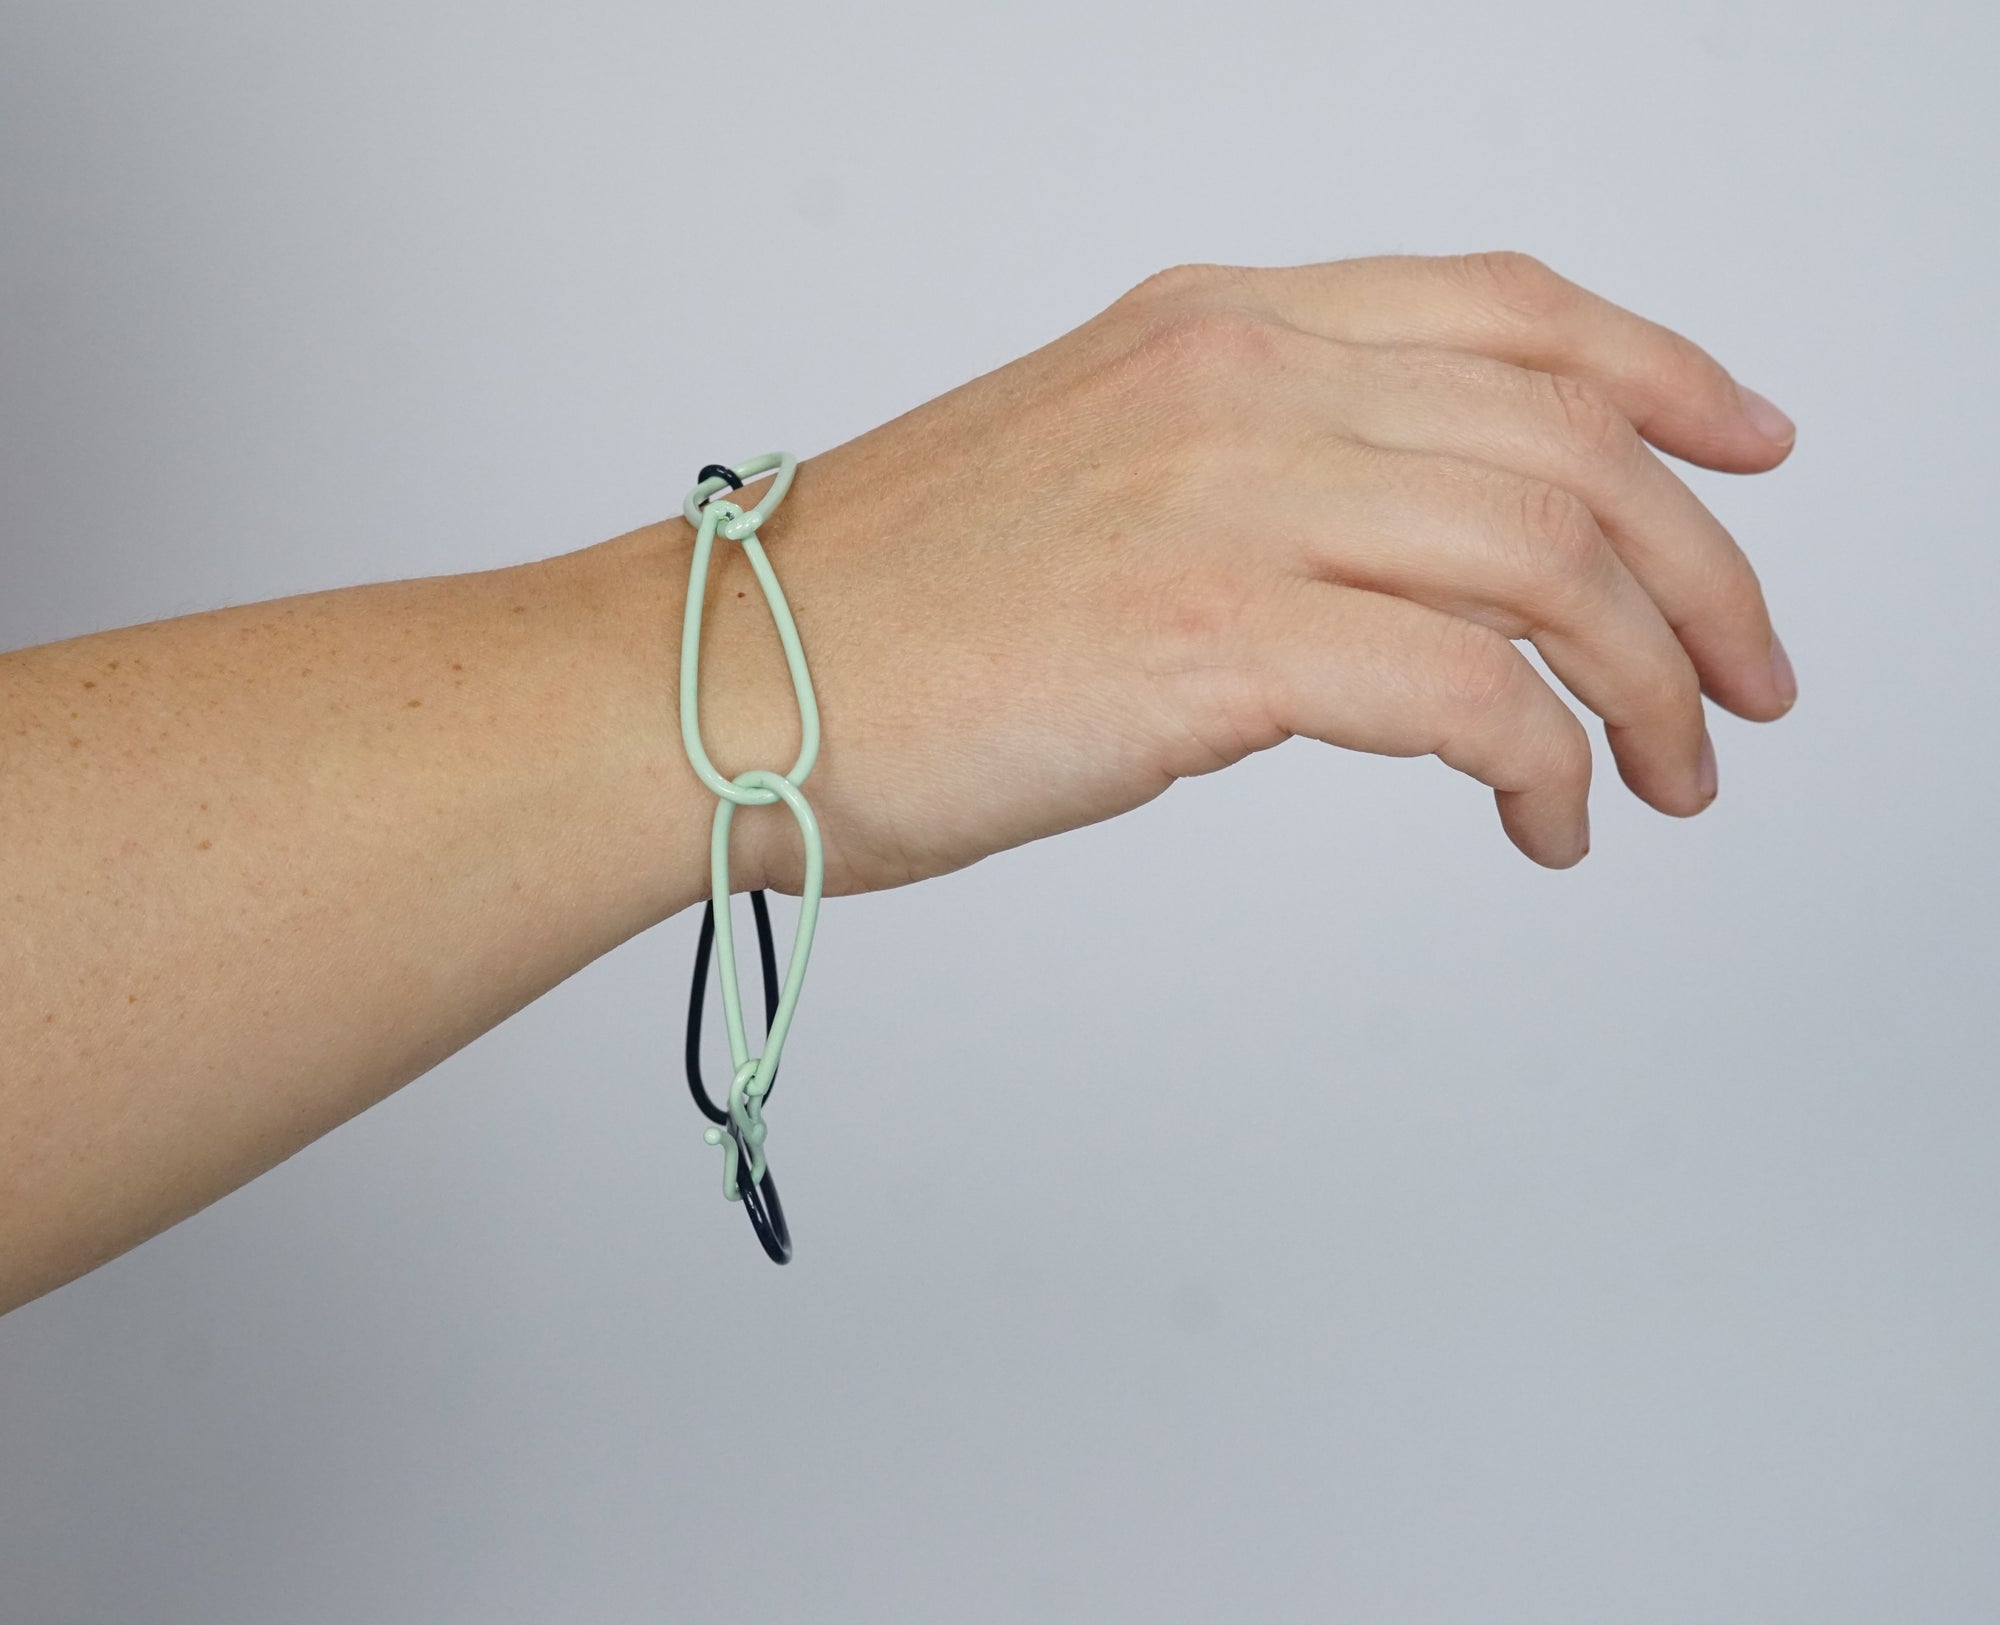 Modular Bracelet in Soft Mint and Dark Navy - large/extra large